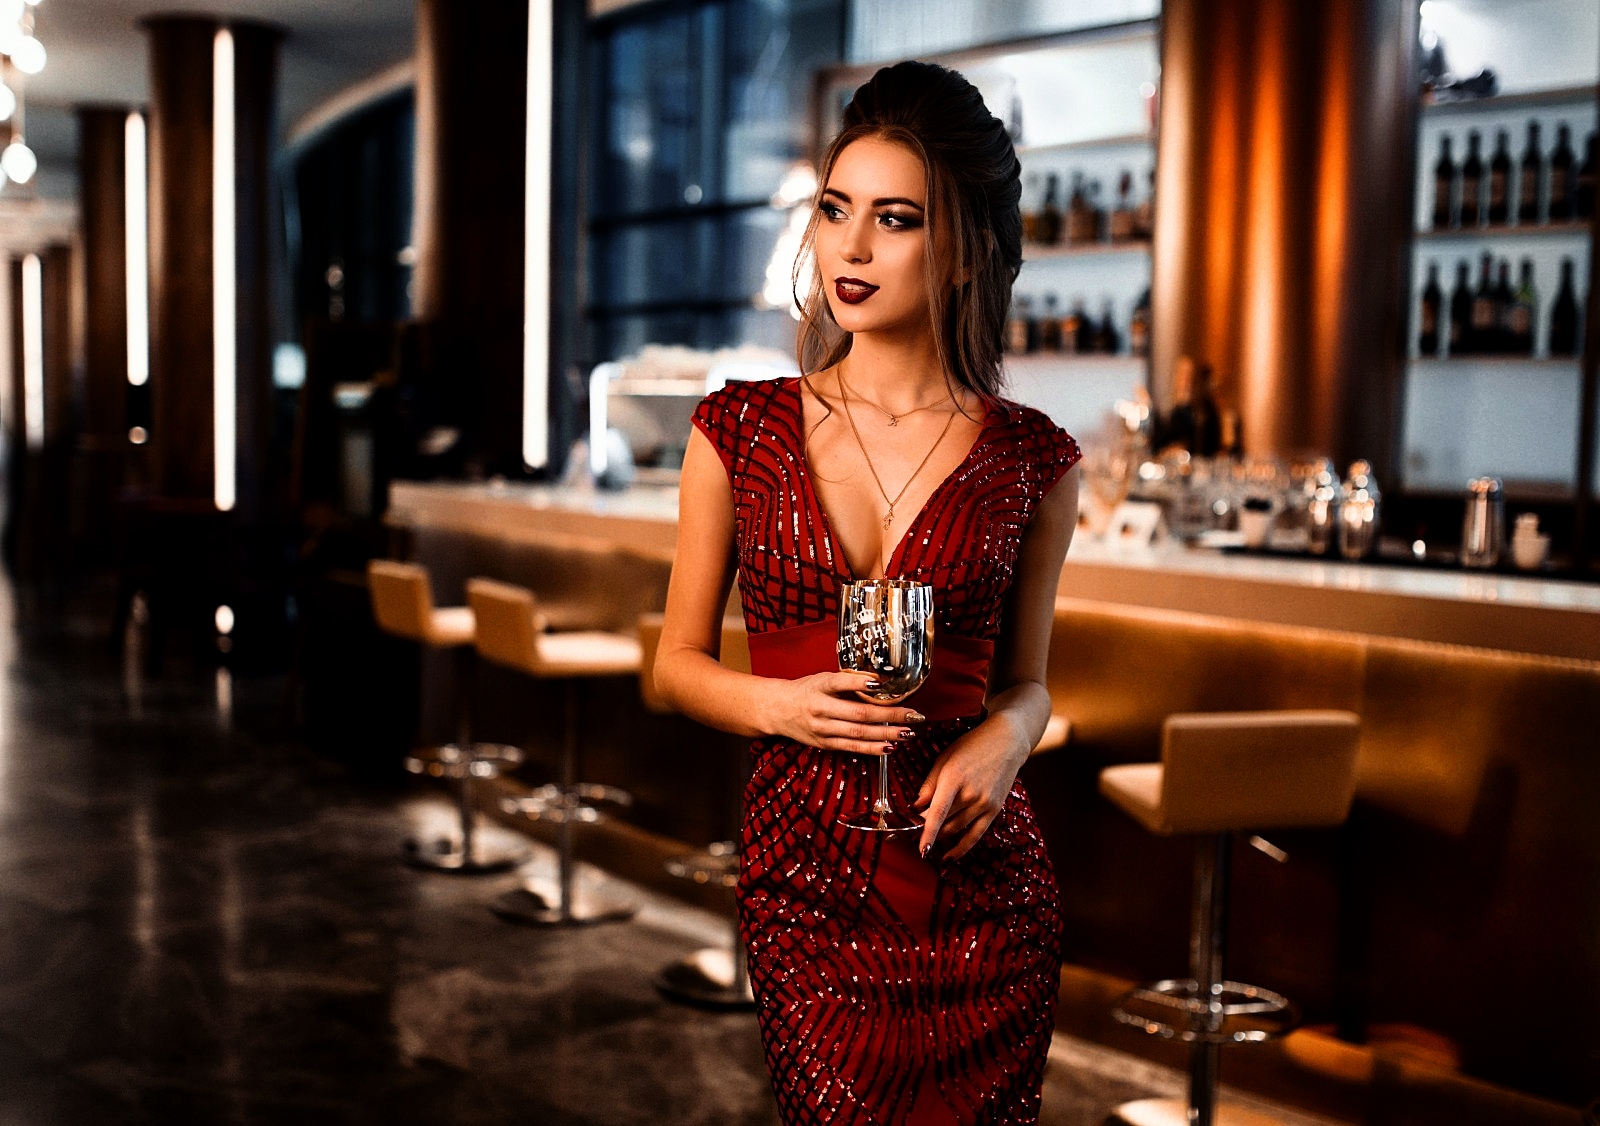 People 1600x1126 model red dress glass lipstick smiling women necklace red nails drinking glass red lipstick looking away fashion brown eyes long hair blonde restaurant